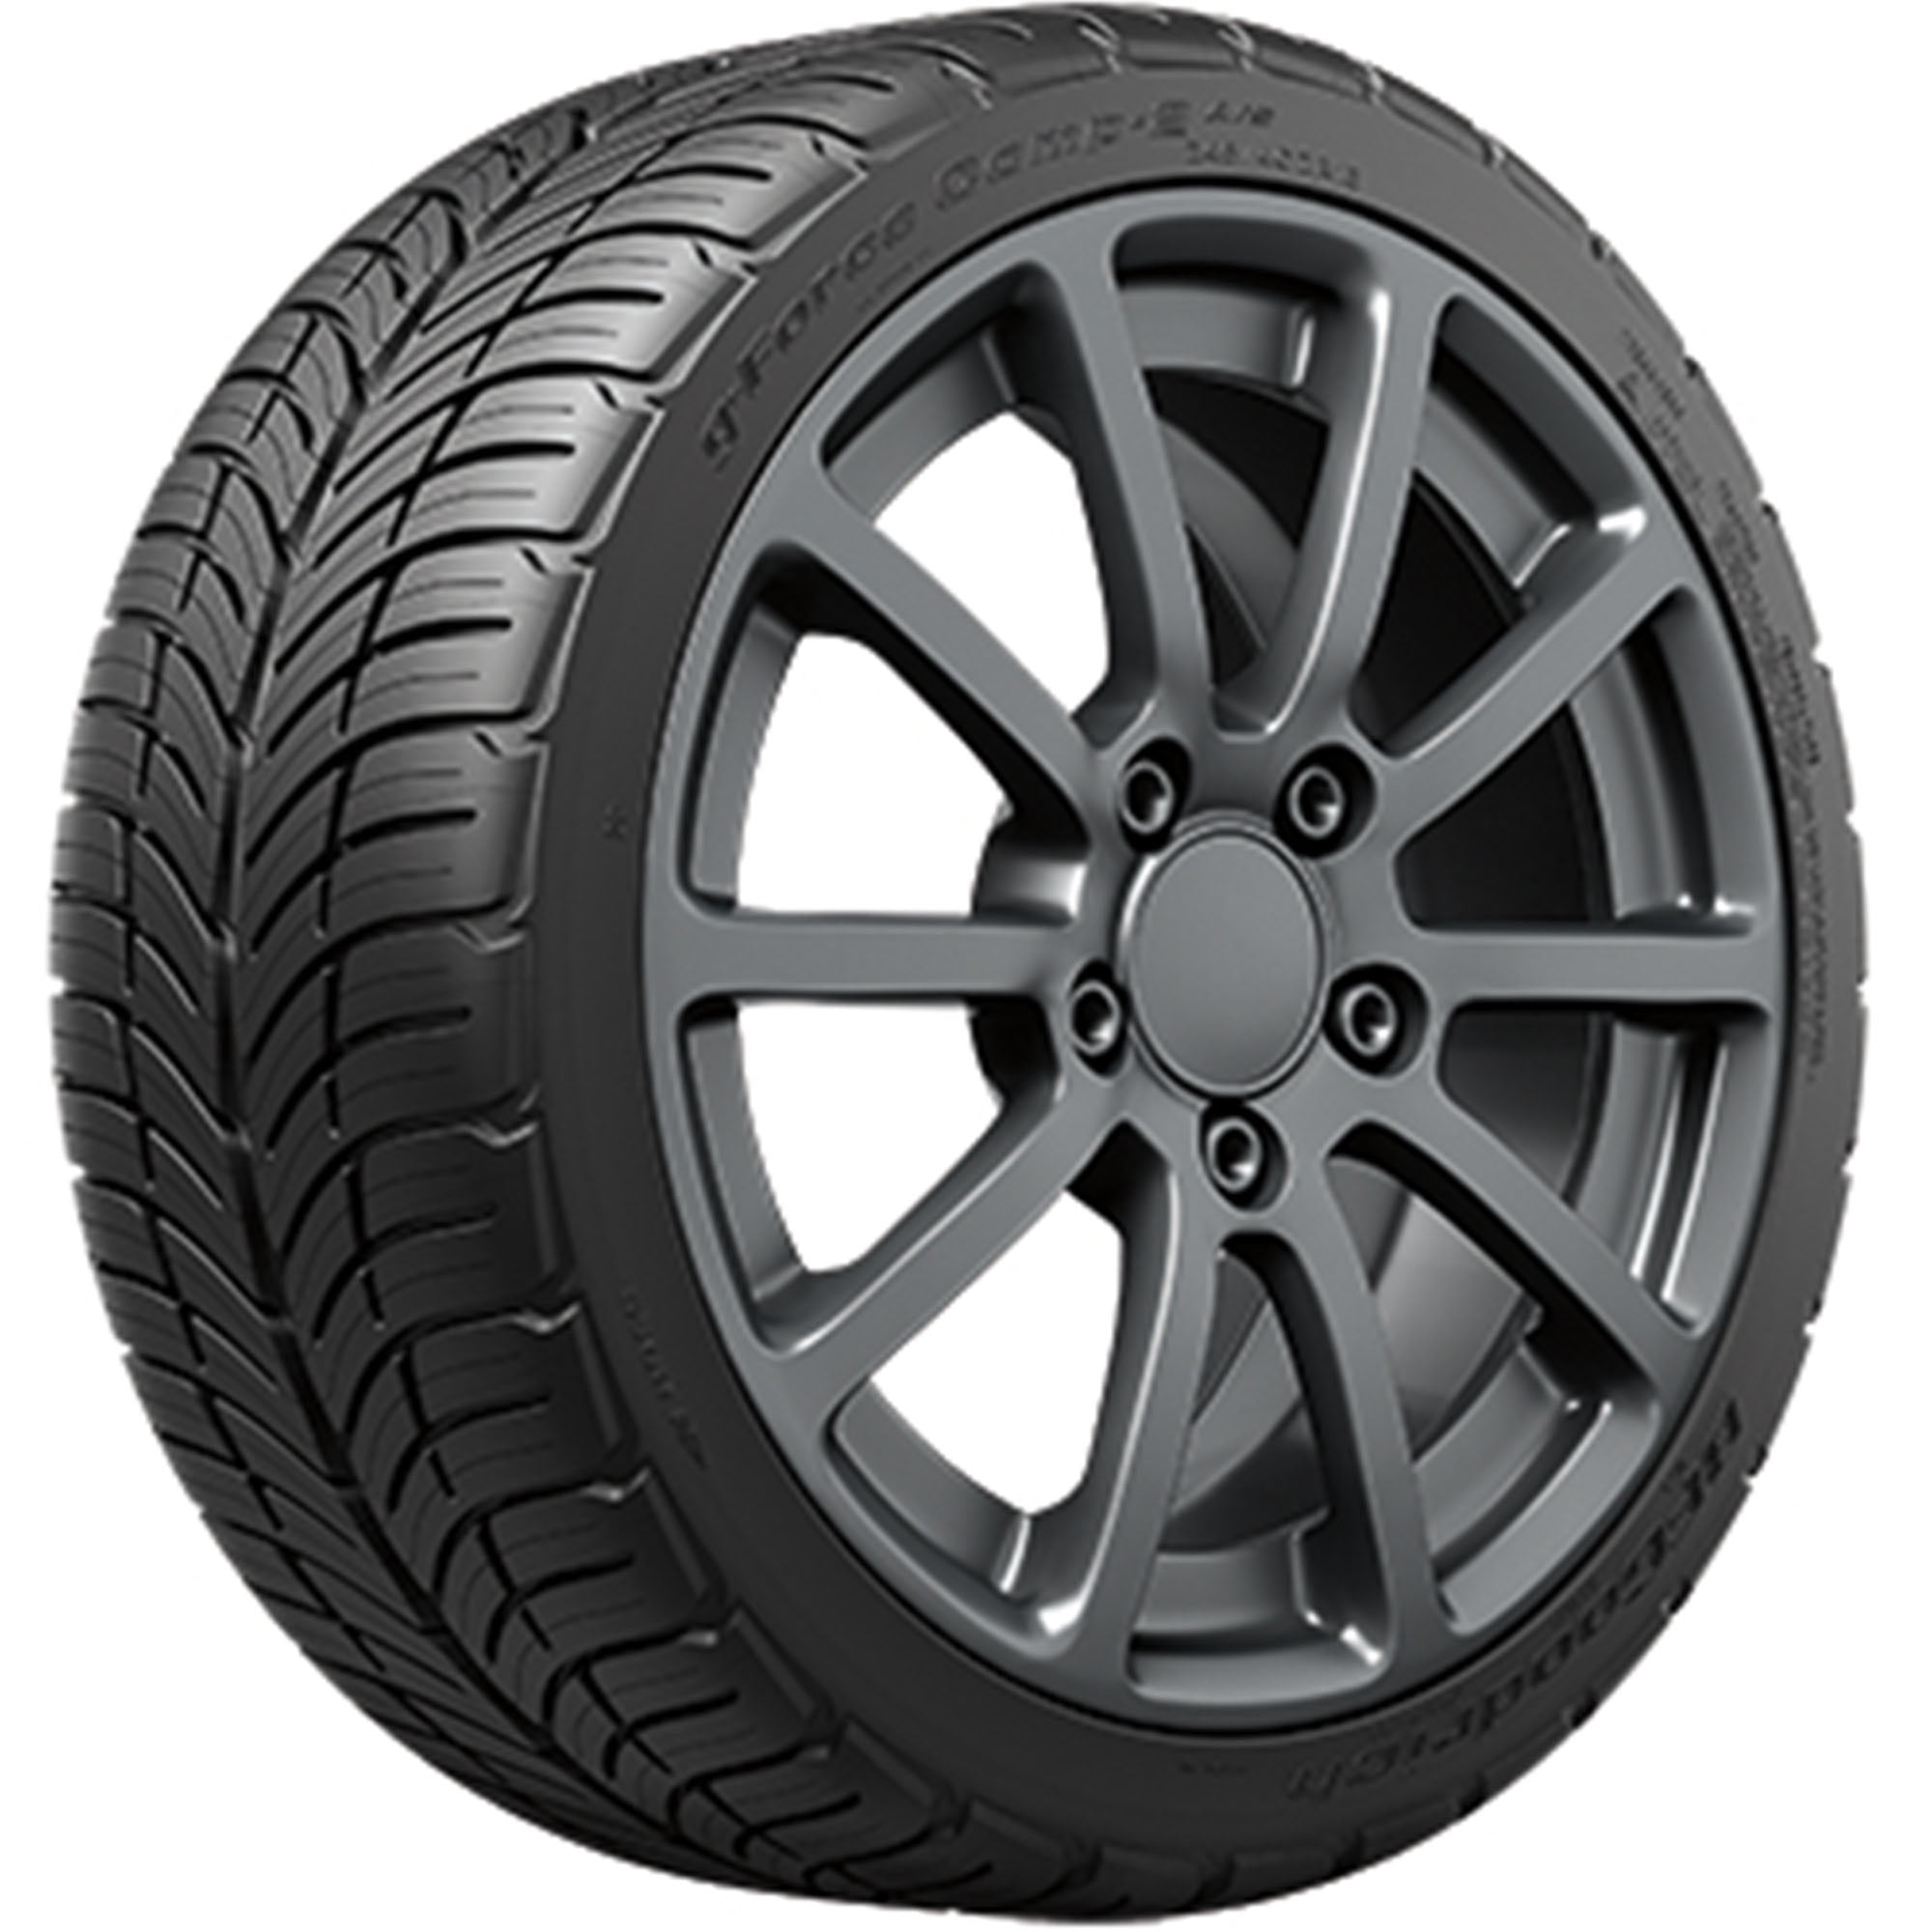 Continental ExtremeContact DWS PLUS All Season ZR Y XL